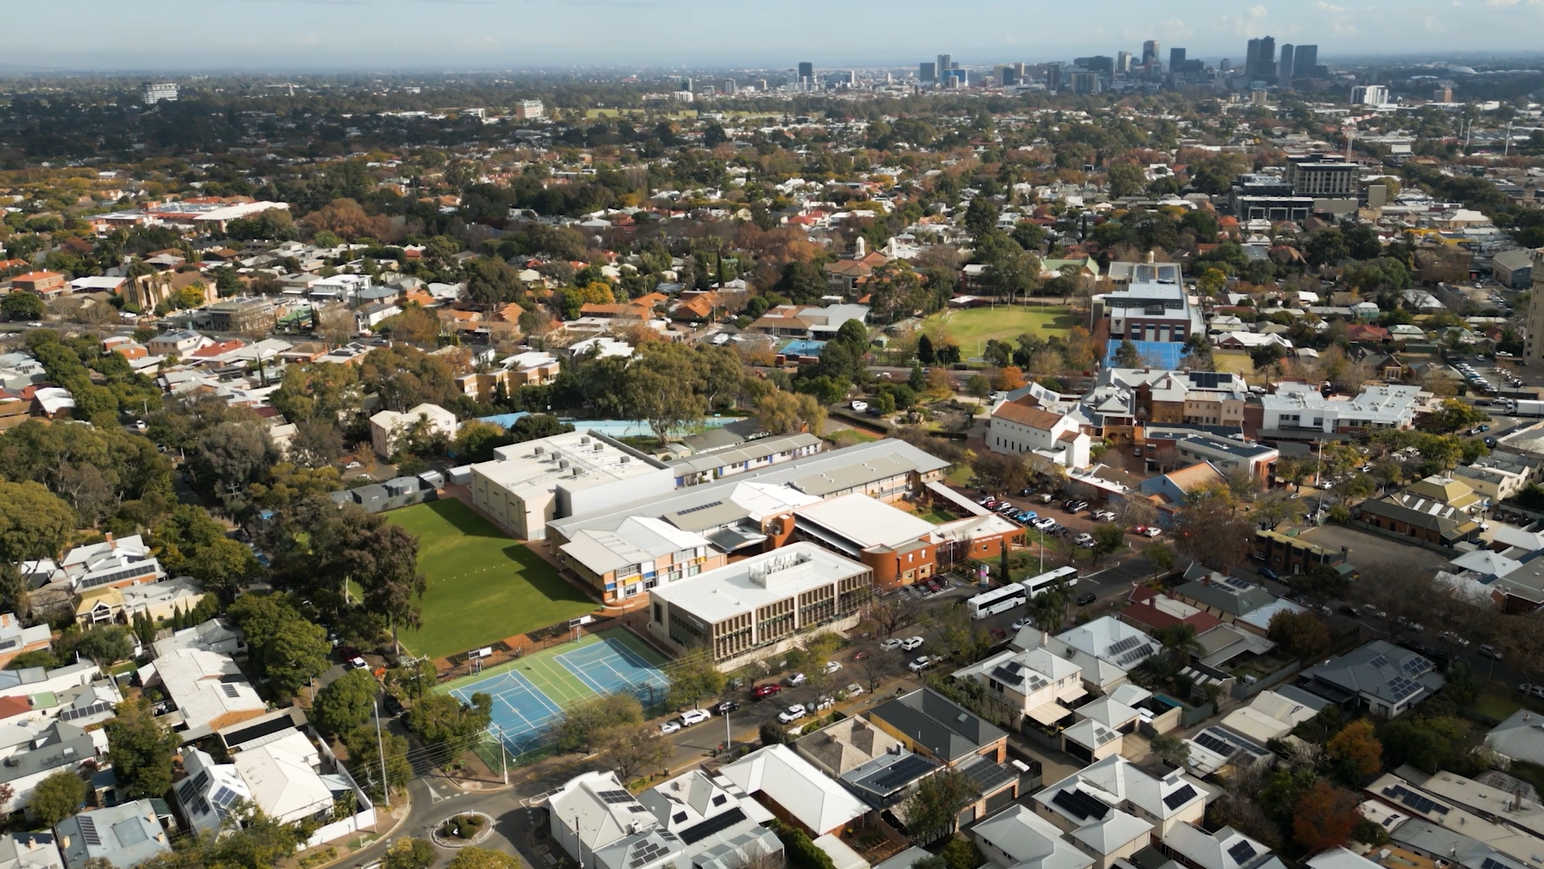 Mary MacKillop College